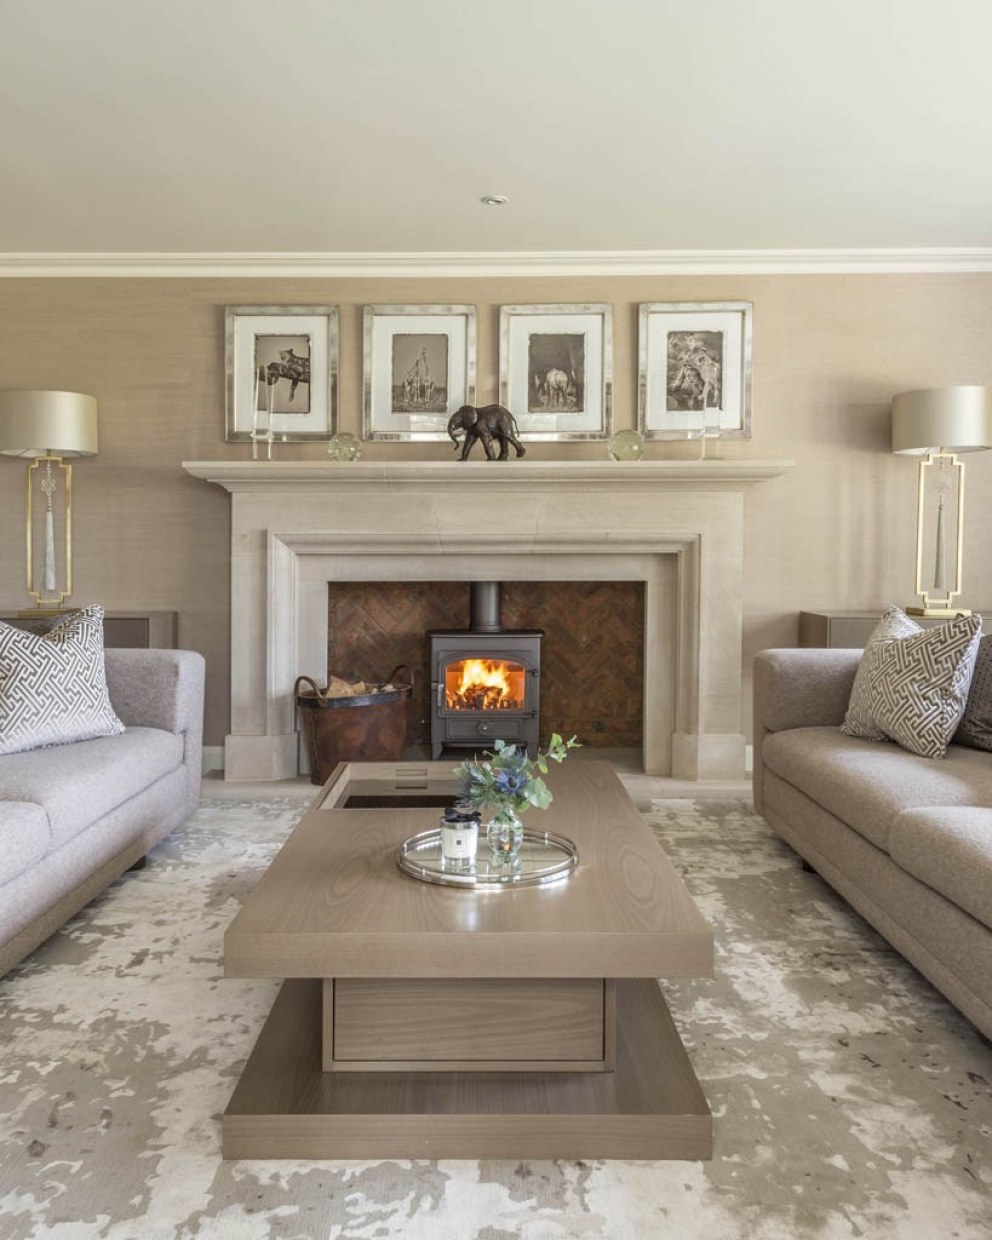 Country home - Hambleden valley  | Sitting room fireplace  | Interior Designers